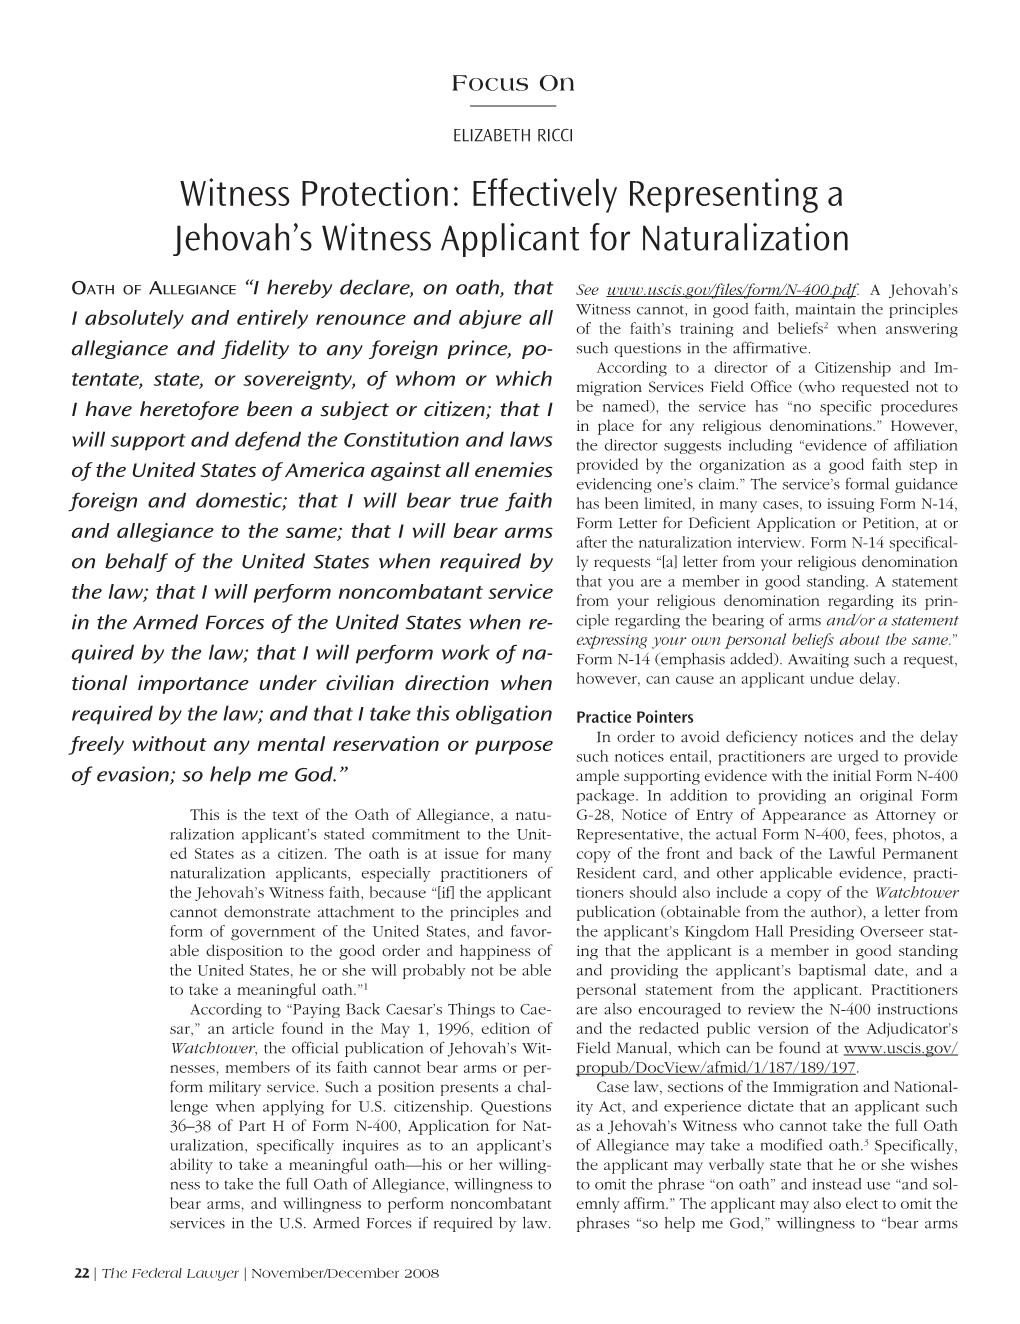 Witness Protection: Effectively Representing a Jehovah's Witness